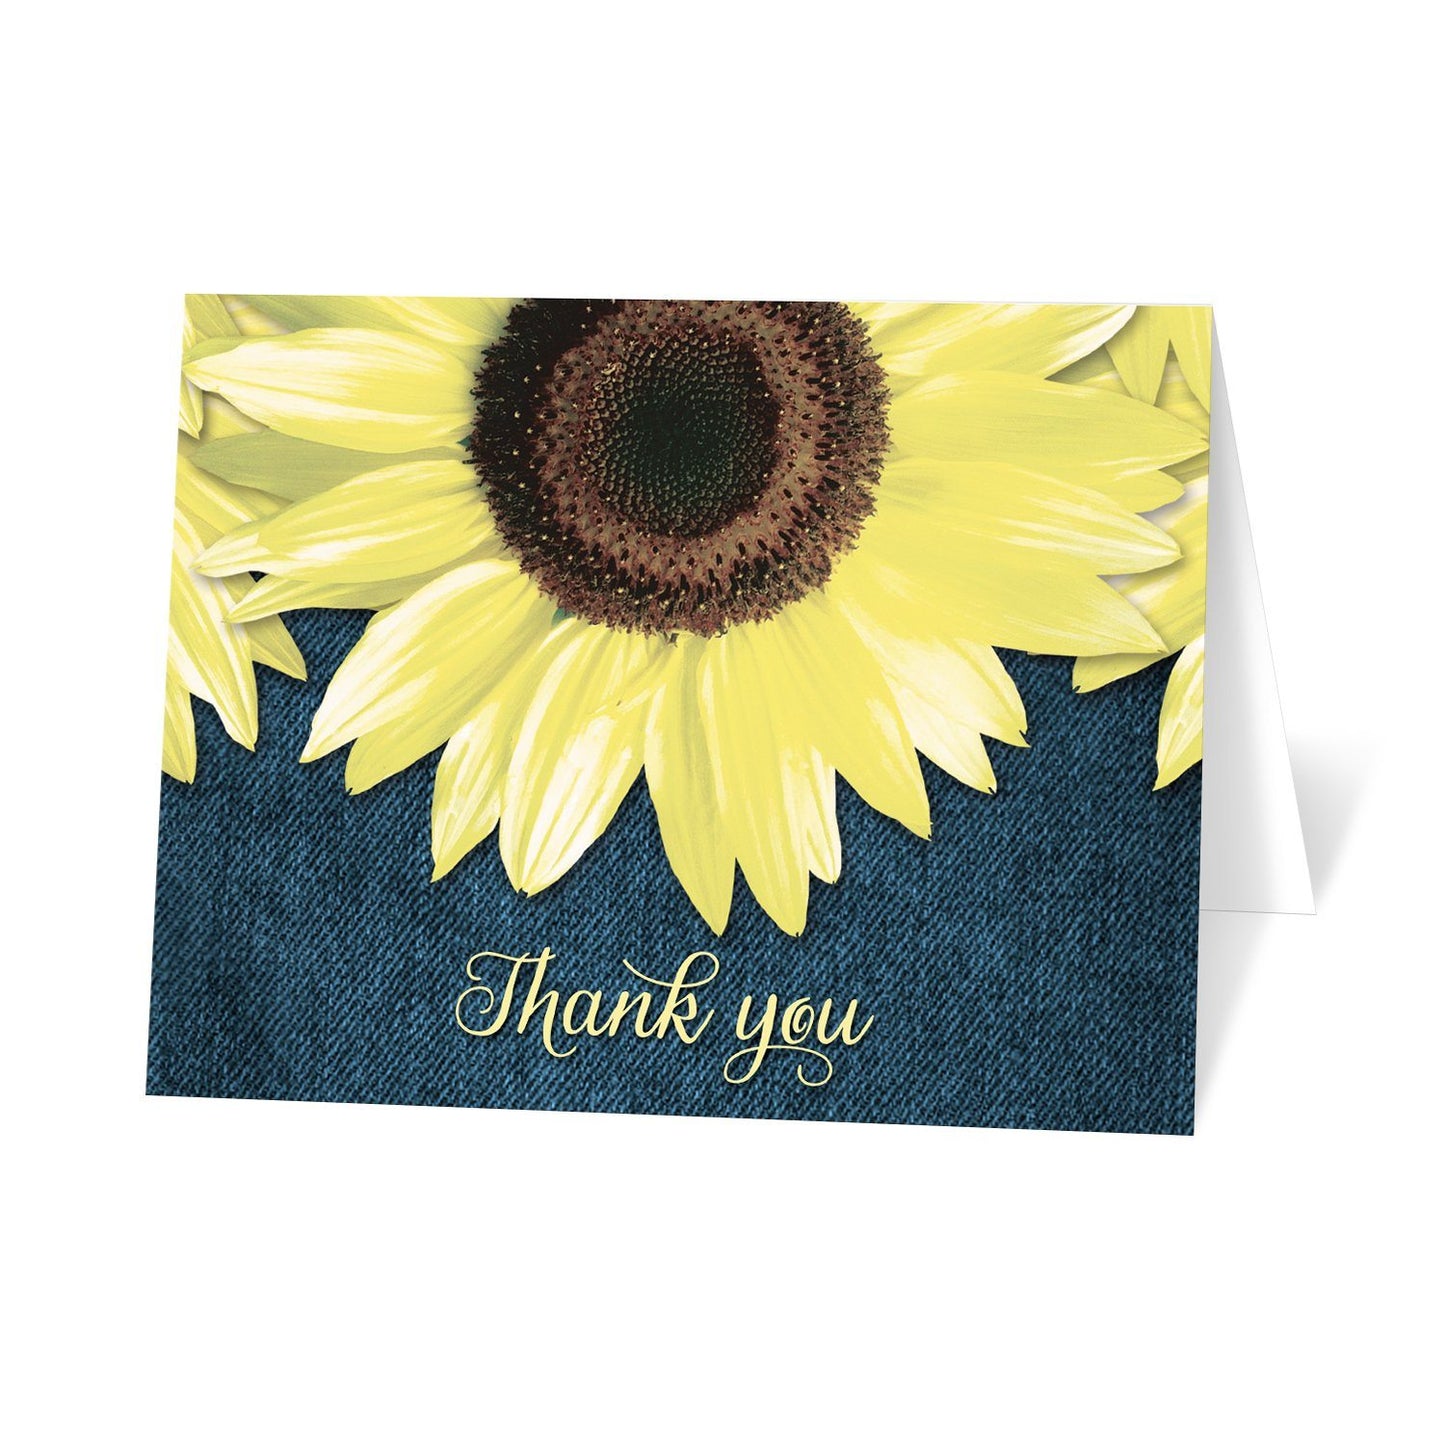 Rustic Sunflower and Denim Thank You Cards at Artistically Invited